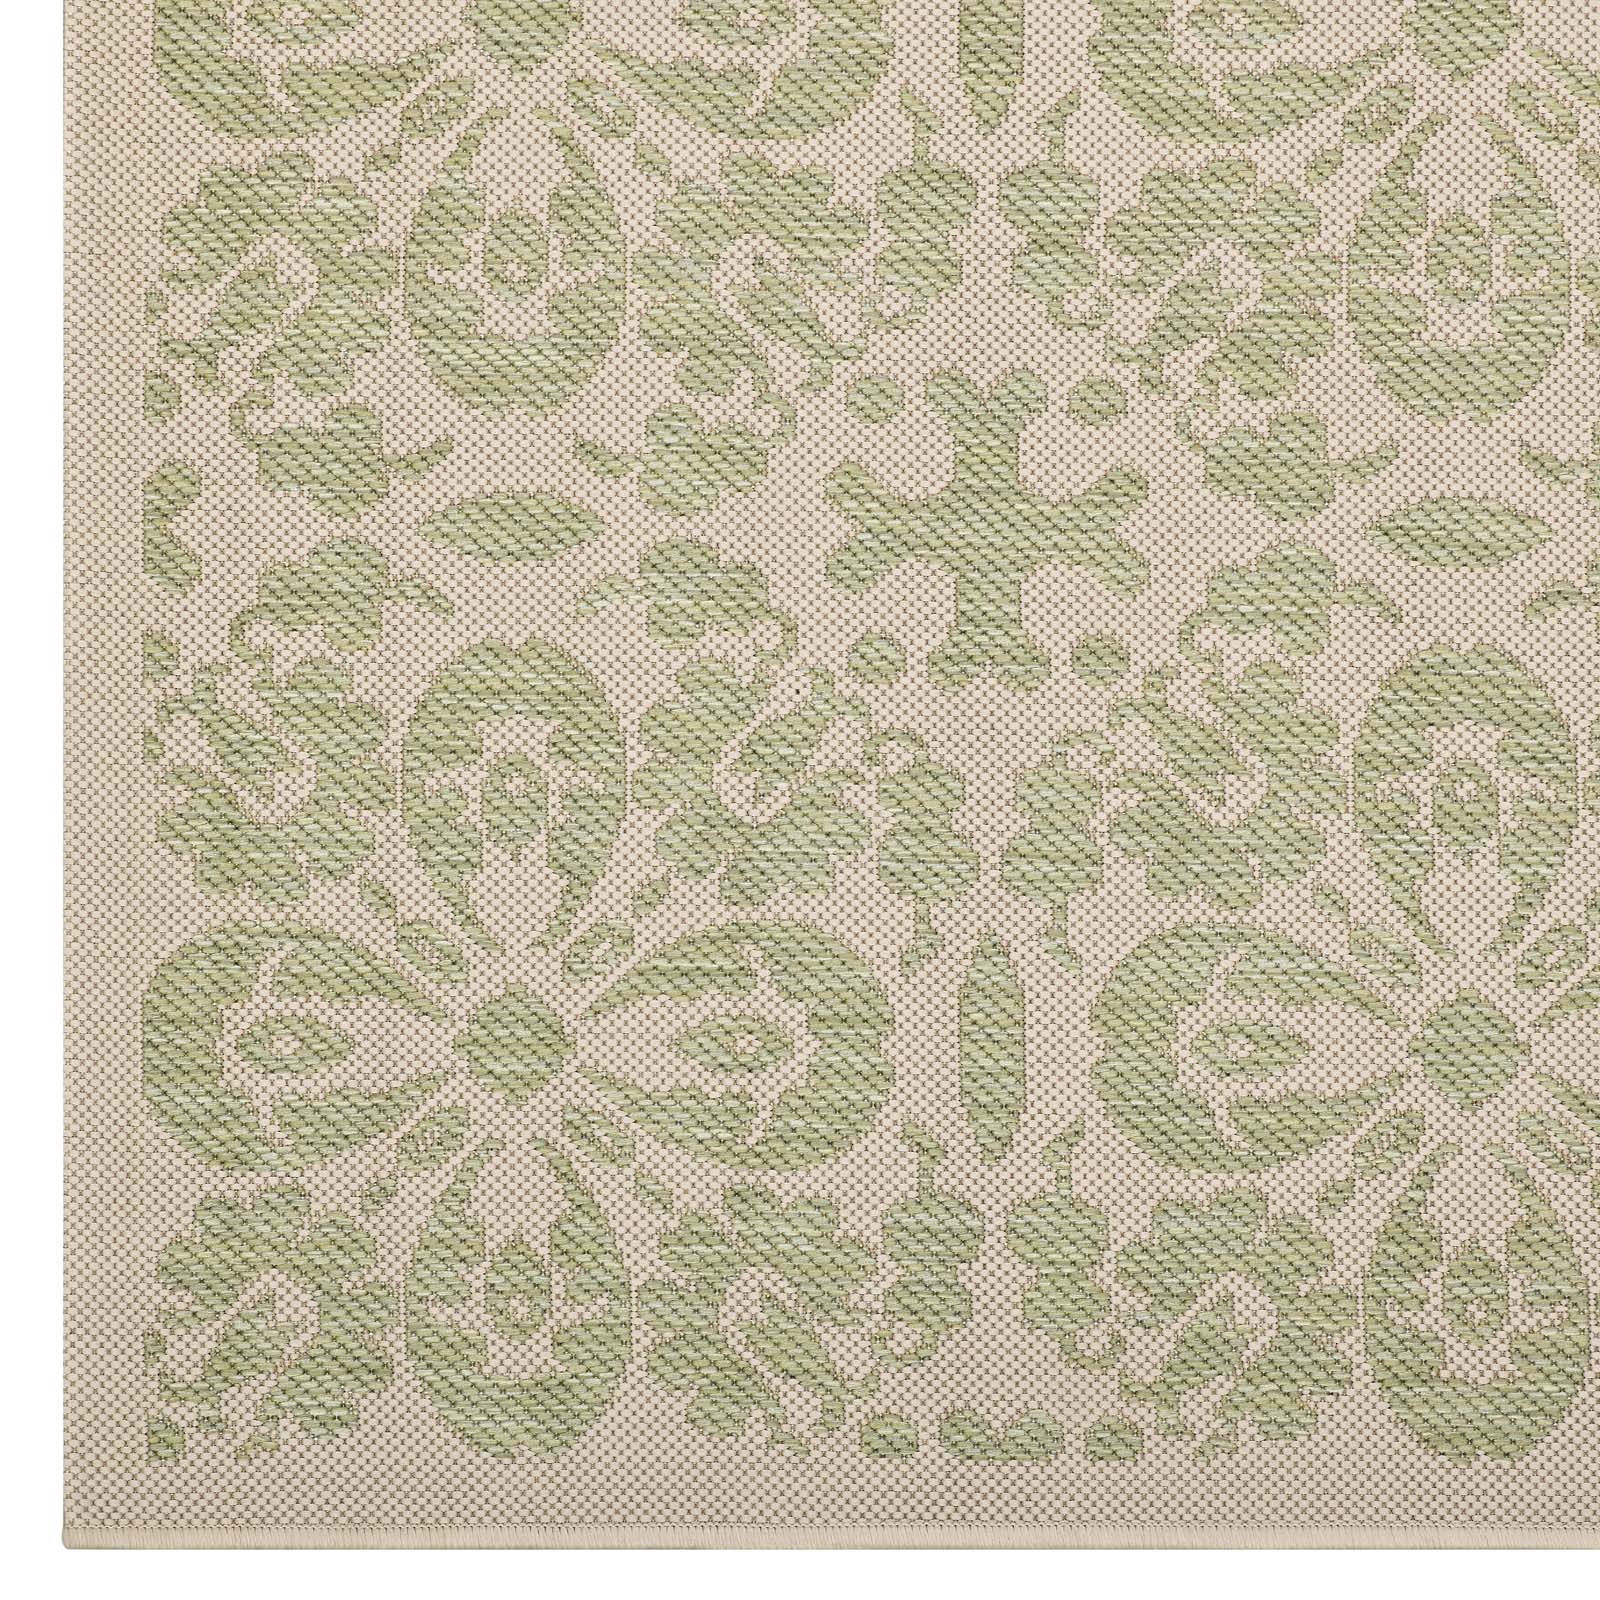 Modway Outdoor Rugs - Ariana Floral Trellis 8'x10' Outdoor Area Rug Light Green & Beige